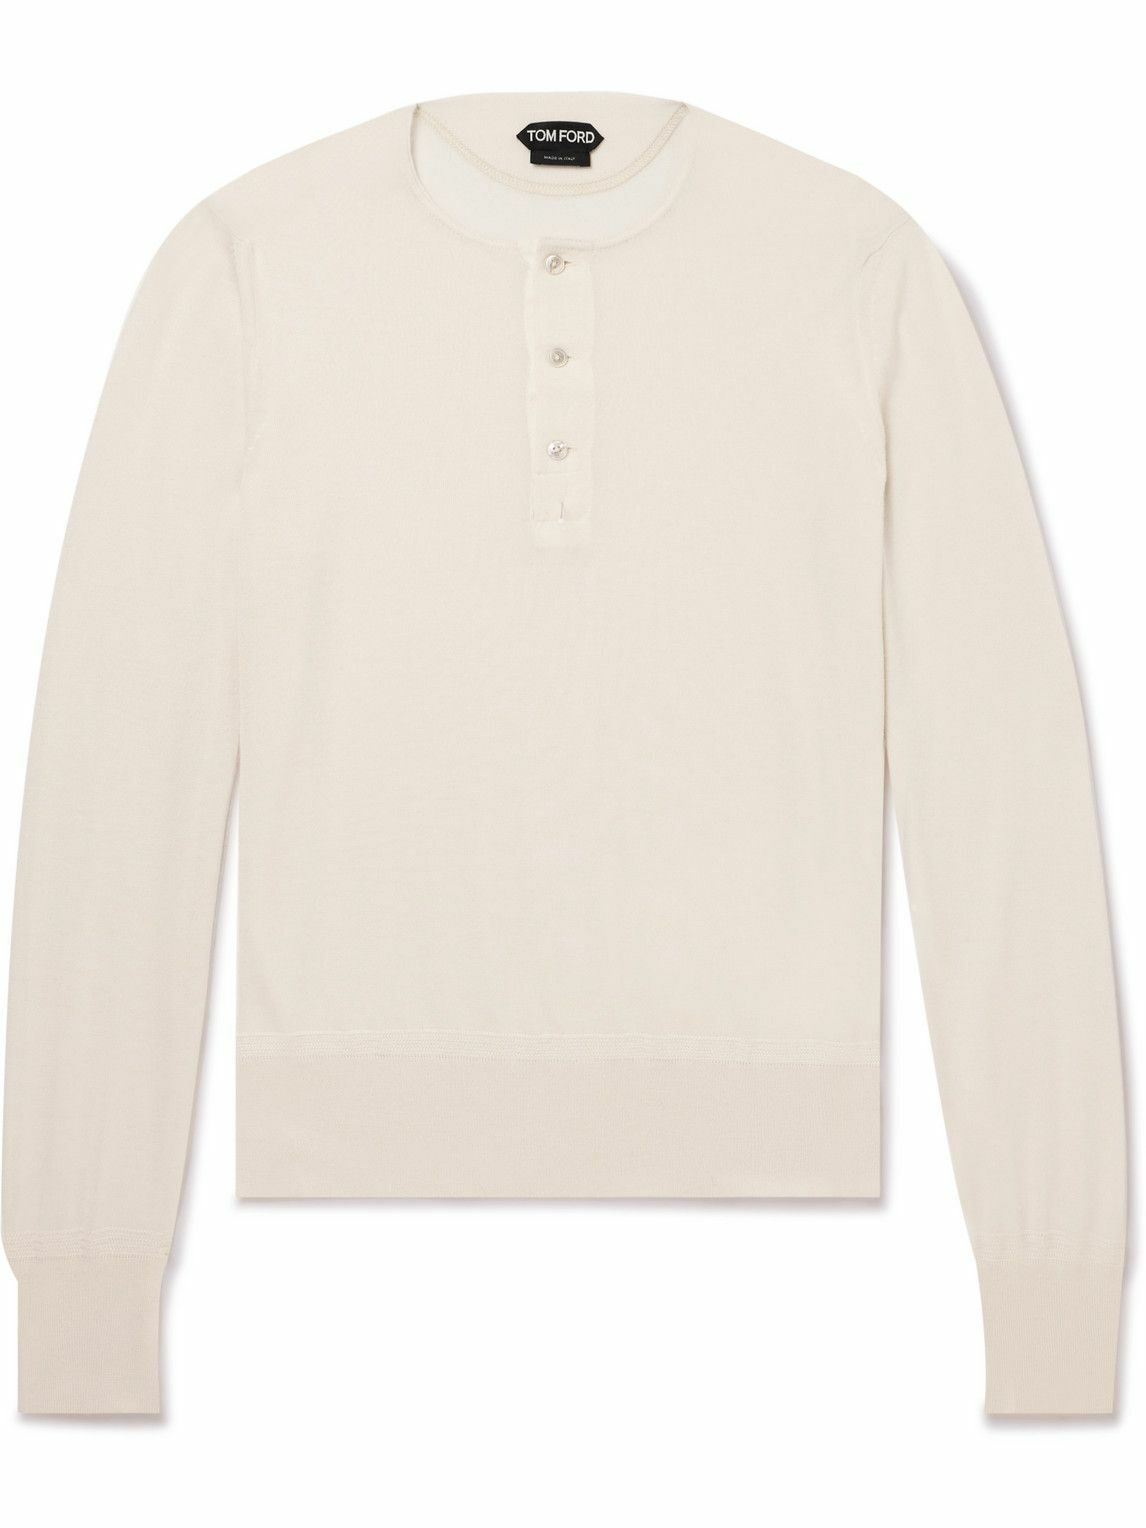 TOM FORD - Cashmere and Silk-Blend Henley T-Shirt - Neutrals TOM FORD